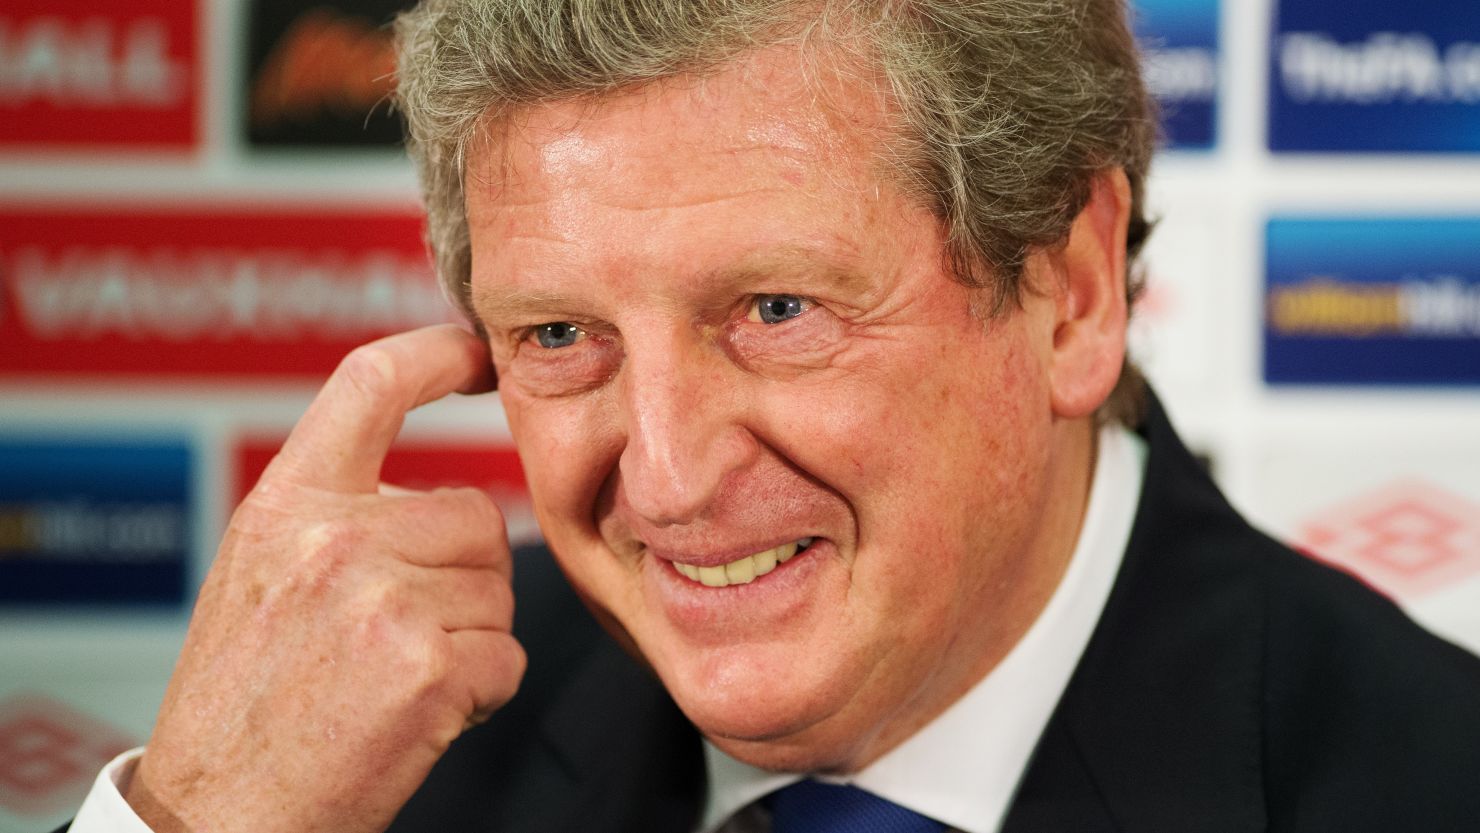 Roy Hodgson has been forced to apologize after divulging details about his England squad on the London underground